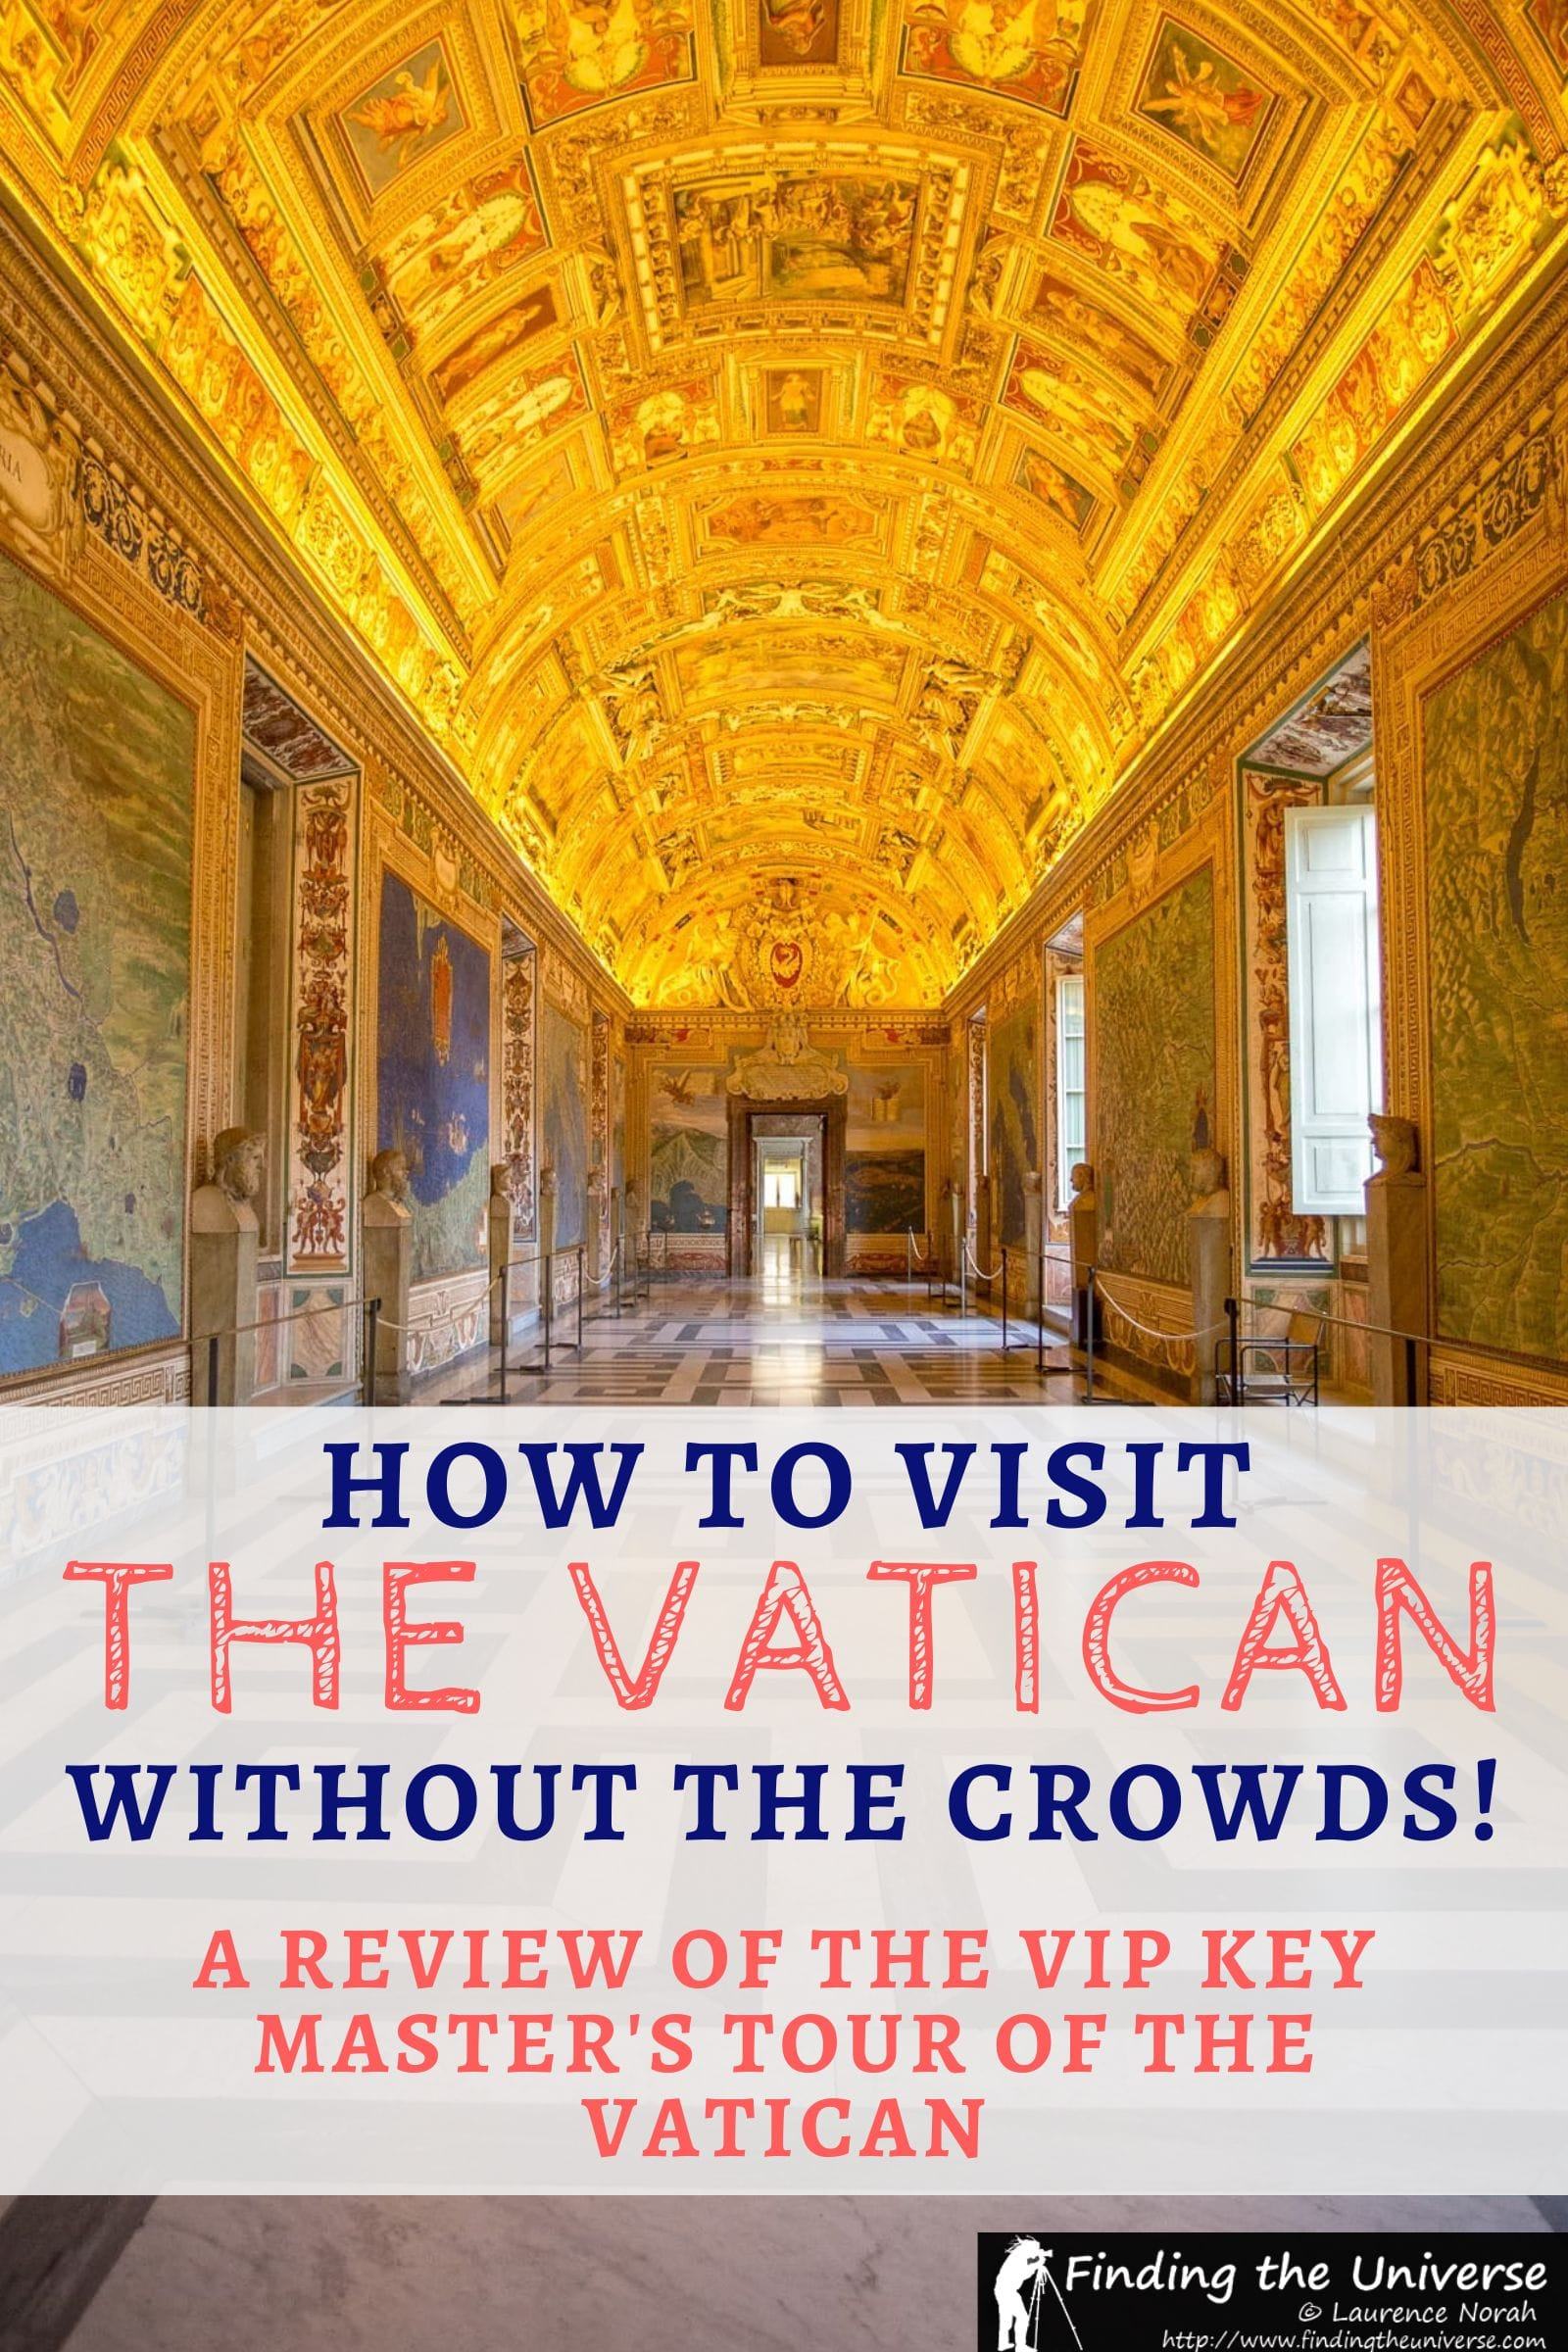 A review of the VIP Vatican Key Master's Tour, which offers exclusive early access to the Vatican Museums before the crowds.